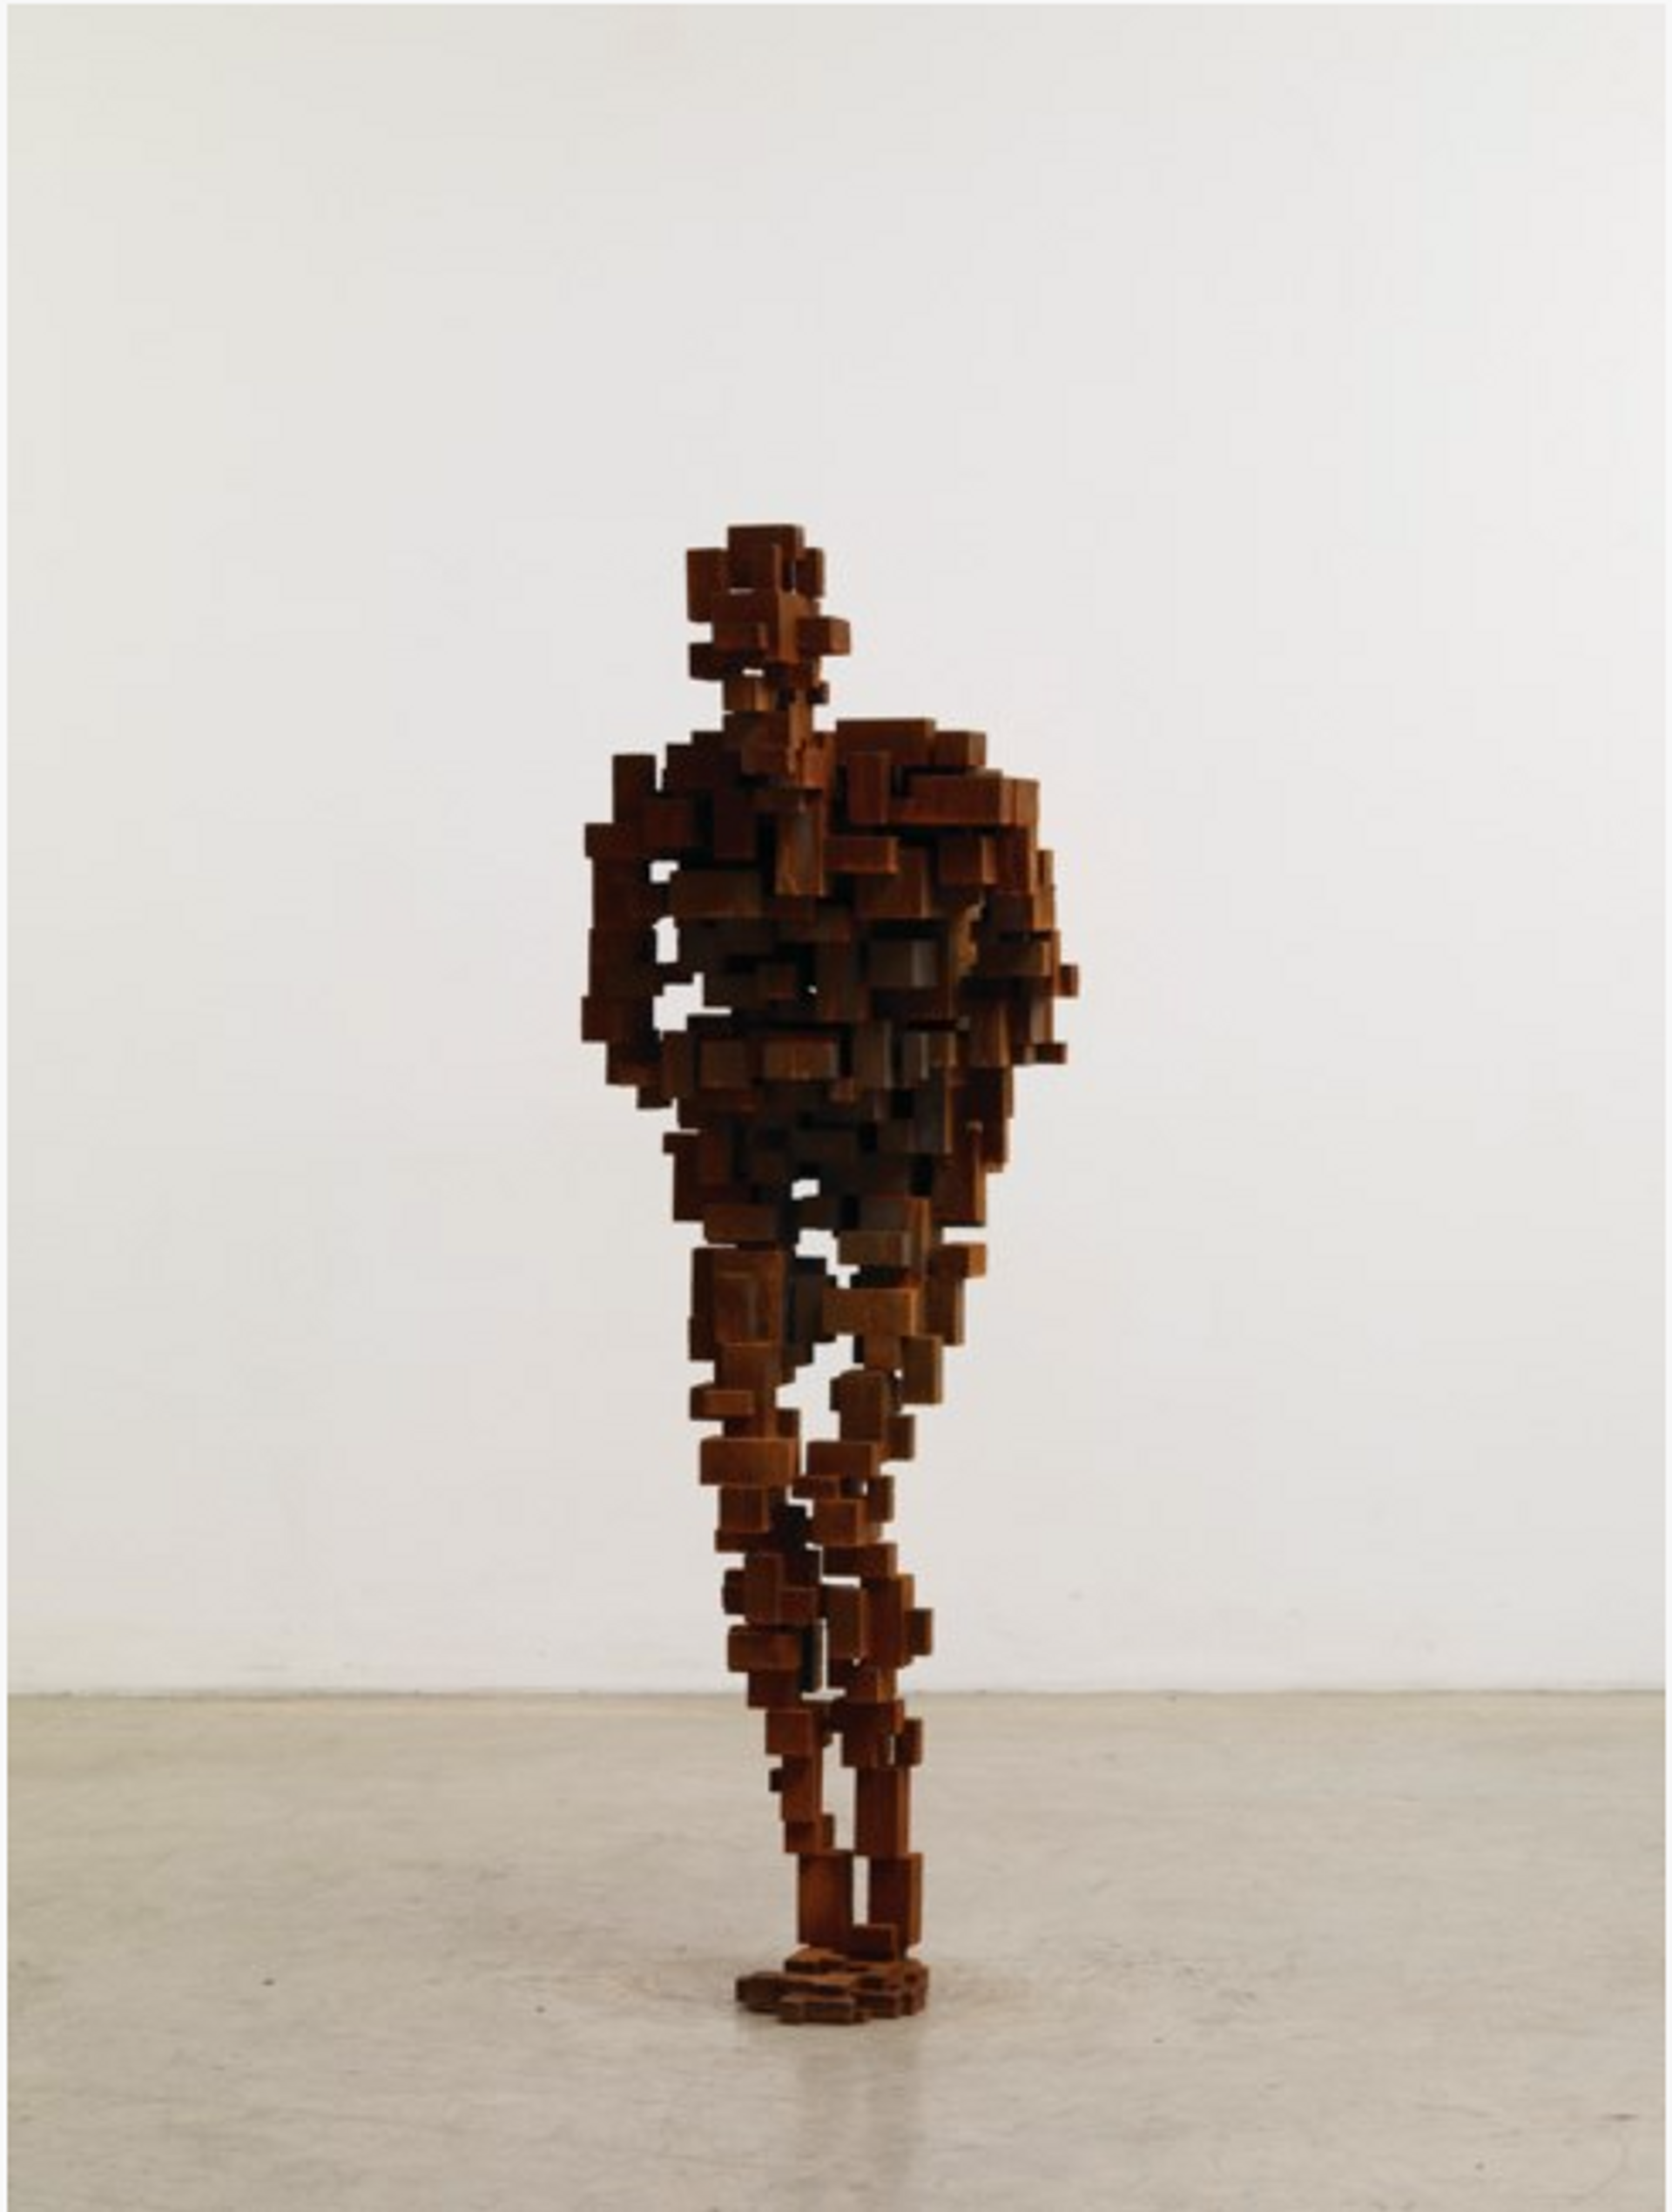 A life-sized sculpture of the human form, depicted in a crouched position with bent knees and both arms wrapped around its torso. The sculpture is constructed using tessellating and stacked iron cubes.